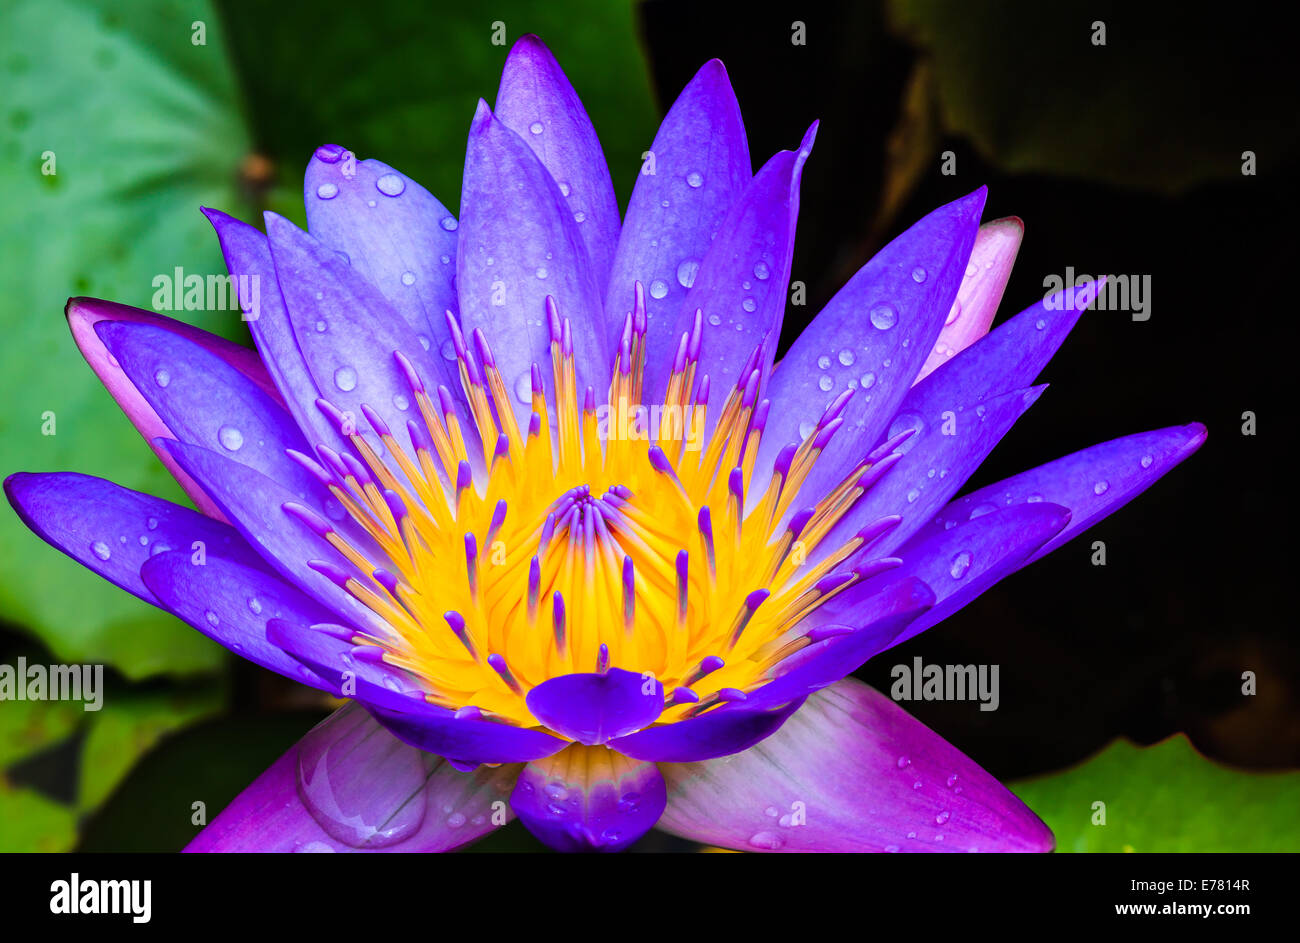 Purple water lily after rains Stock Photo